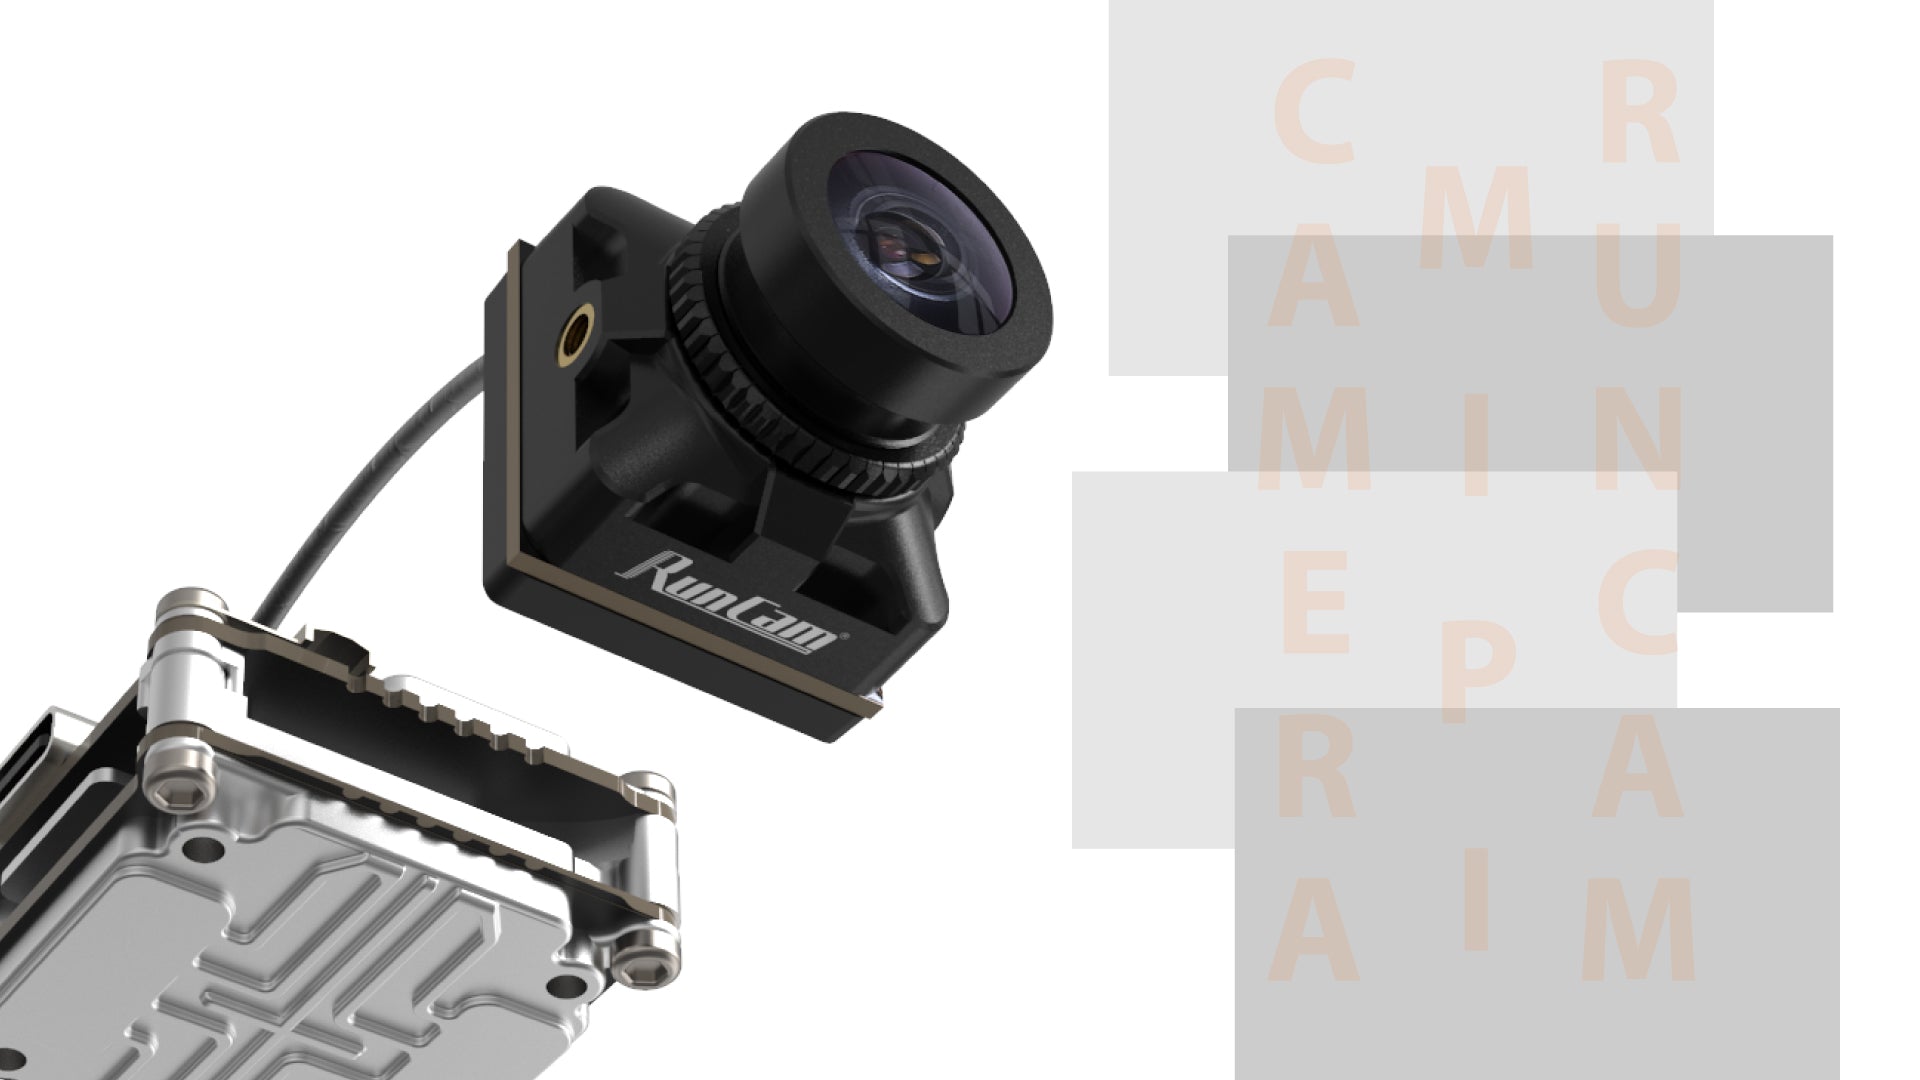 RunCam Link MIPI HD Kit, RUNCAM MIPI Camera Micro size With 6G High Quality Lens Net Weight Only 6.5